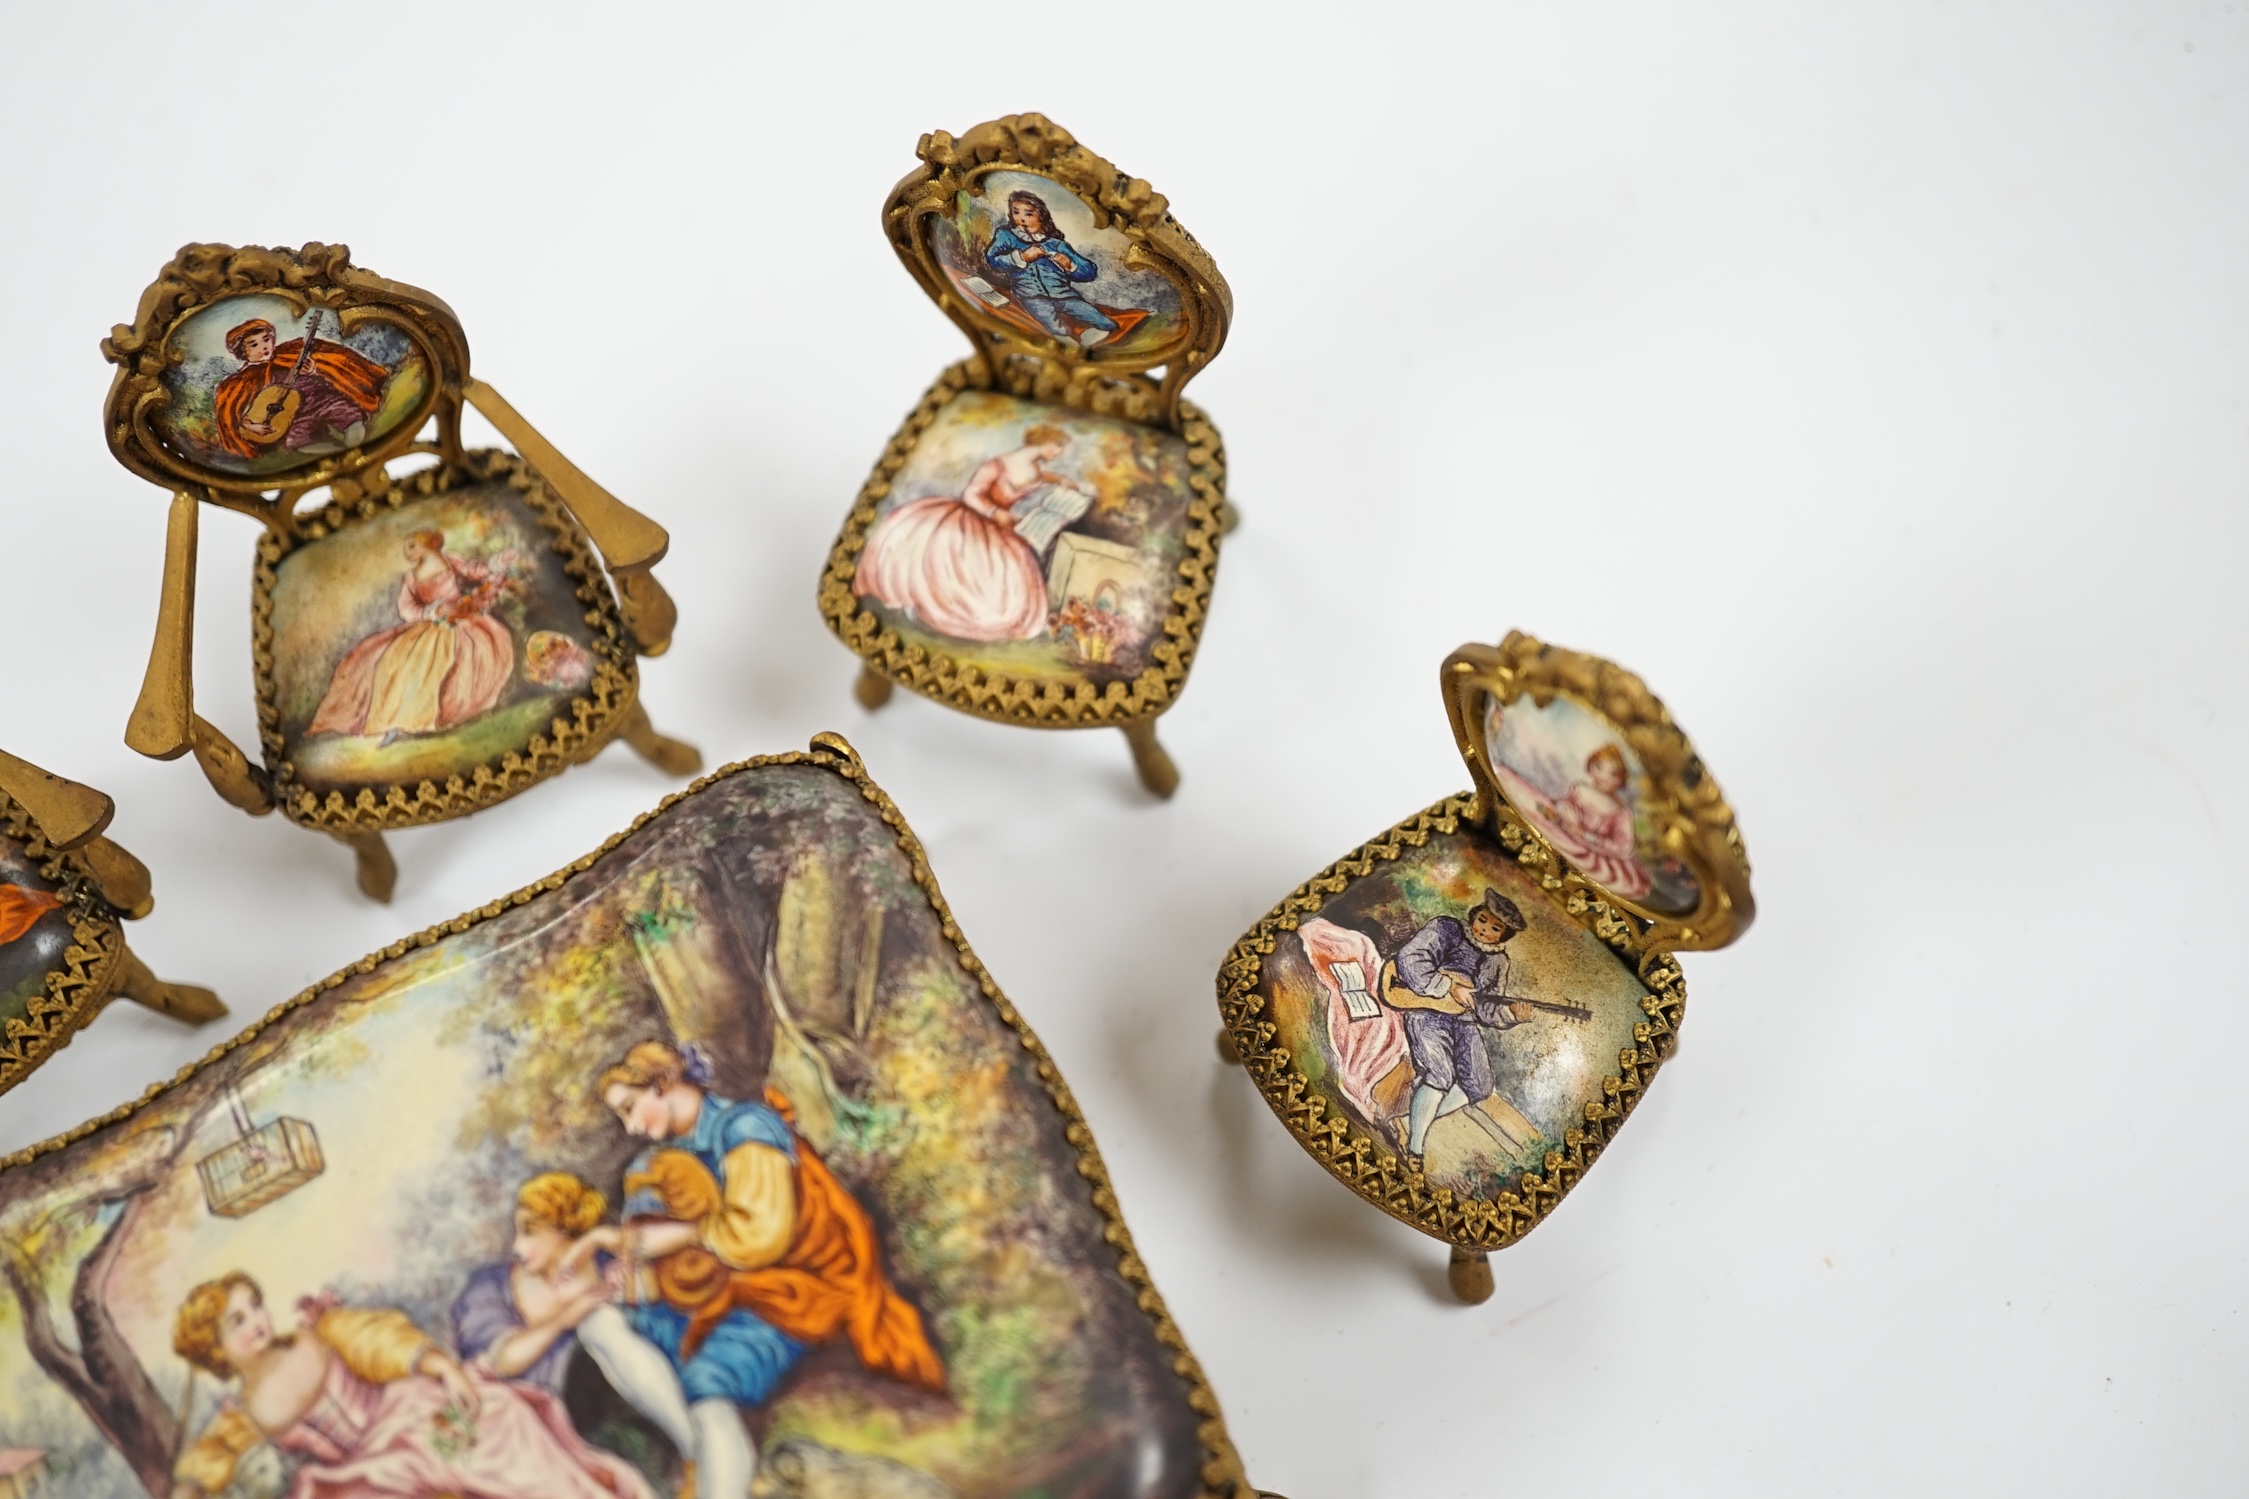 An early 20th century miniature enamel and gilt metal framed furniture set, possibly Austrian, largest 9cm wide. Condition - fair